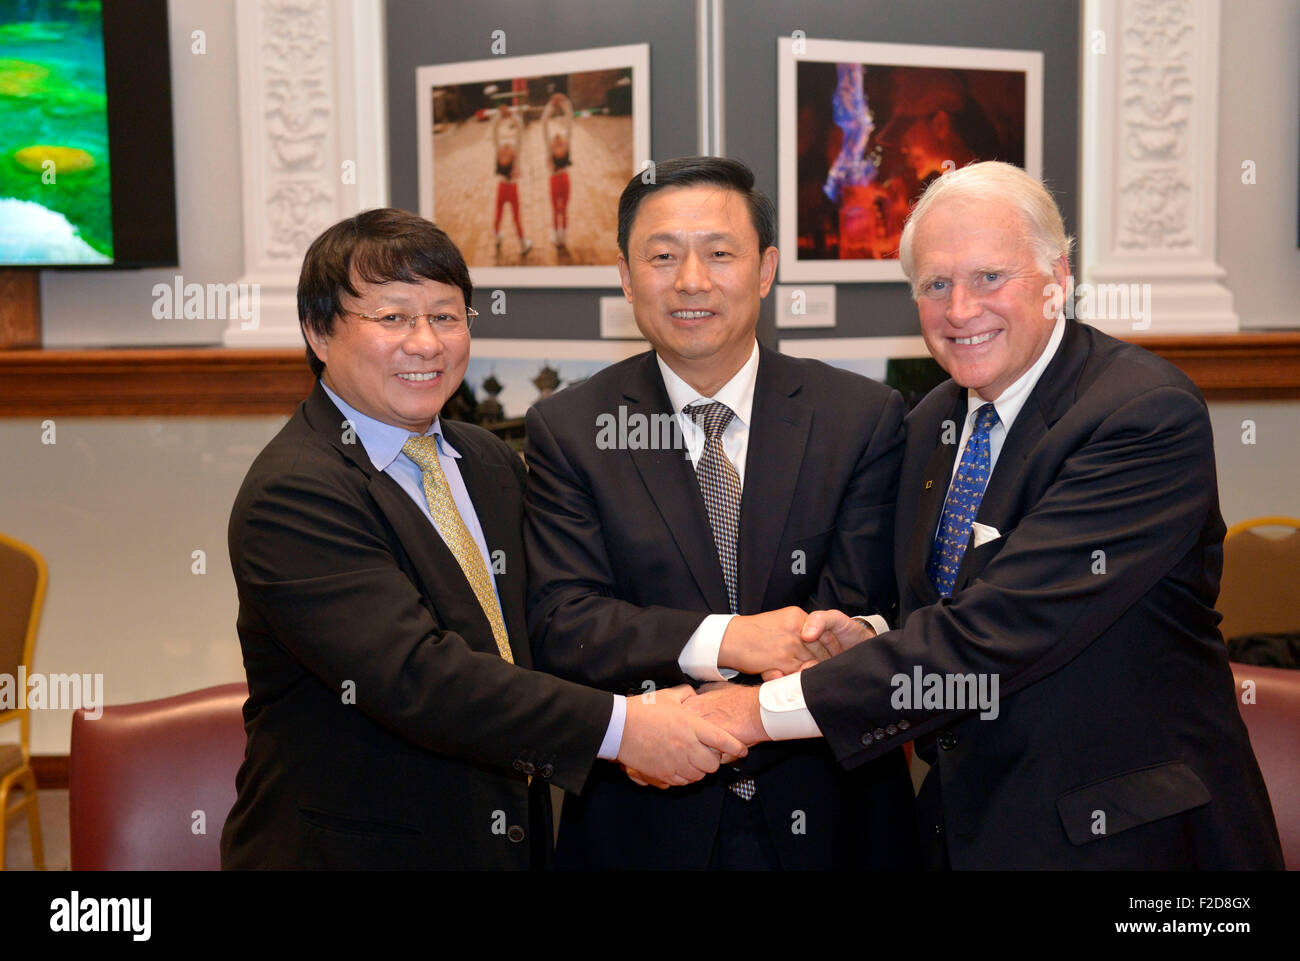 Washington, DC, USA. 16th Sep, 2015. Guo Weimin (C), vice minister of China's State Council Information Office (SCIO), Terry Adamson (R), executive vice president of U.S. National Geographic Society (NGS), and Xiong Xiaoge, executive vice president of venture capital organization International Data Group (IDG) shake hands after signing a memorandum of understanding (MOU) to promote the Chinese culture and cultural exchanges between the two countries in Washington, DC, the United States, Sept. 16, 2015. © Yin Bogu/Xinhua/Alamy Live News Stock Photo